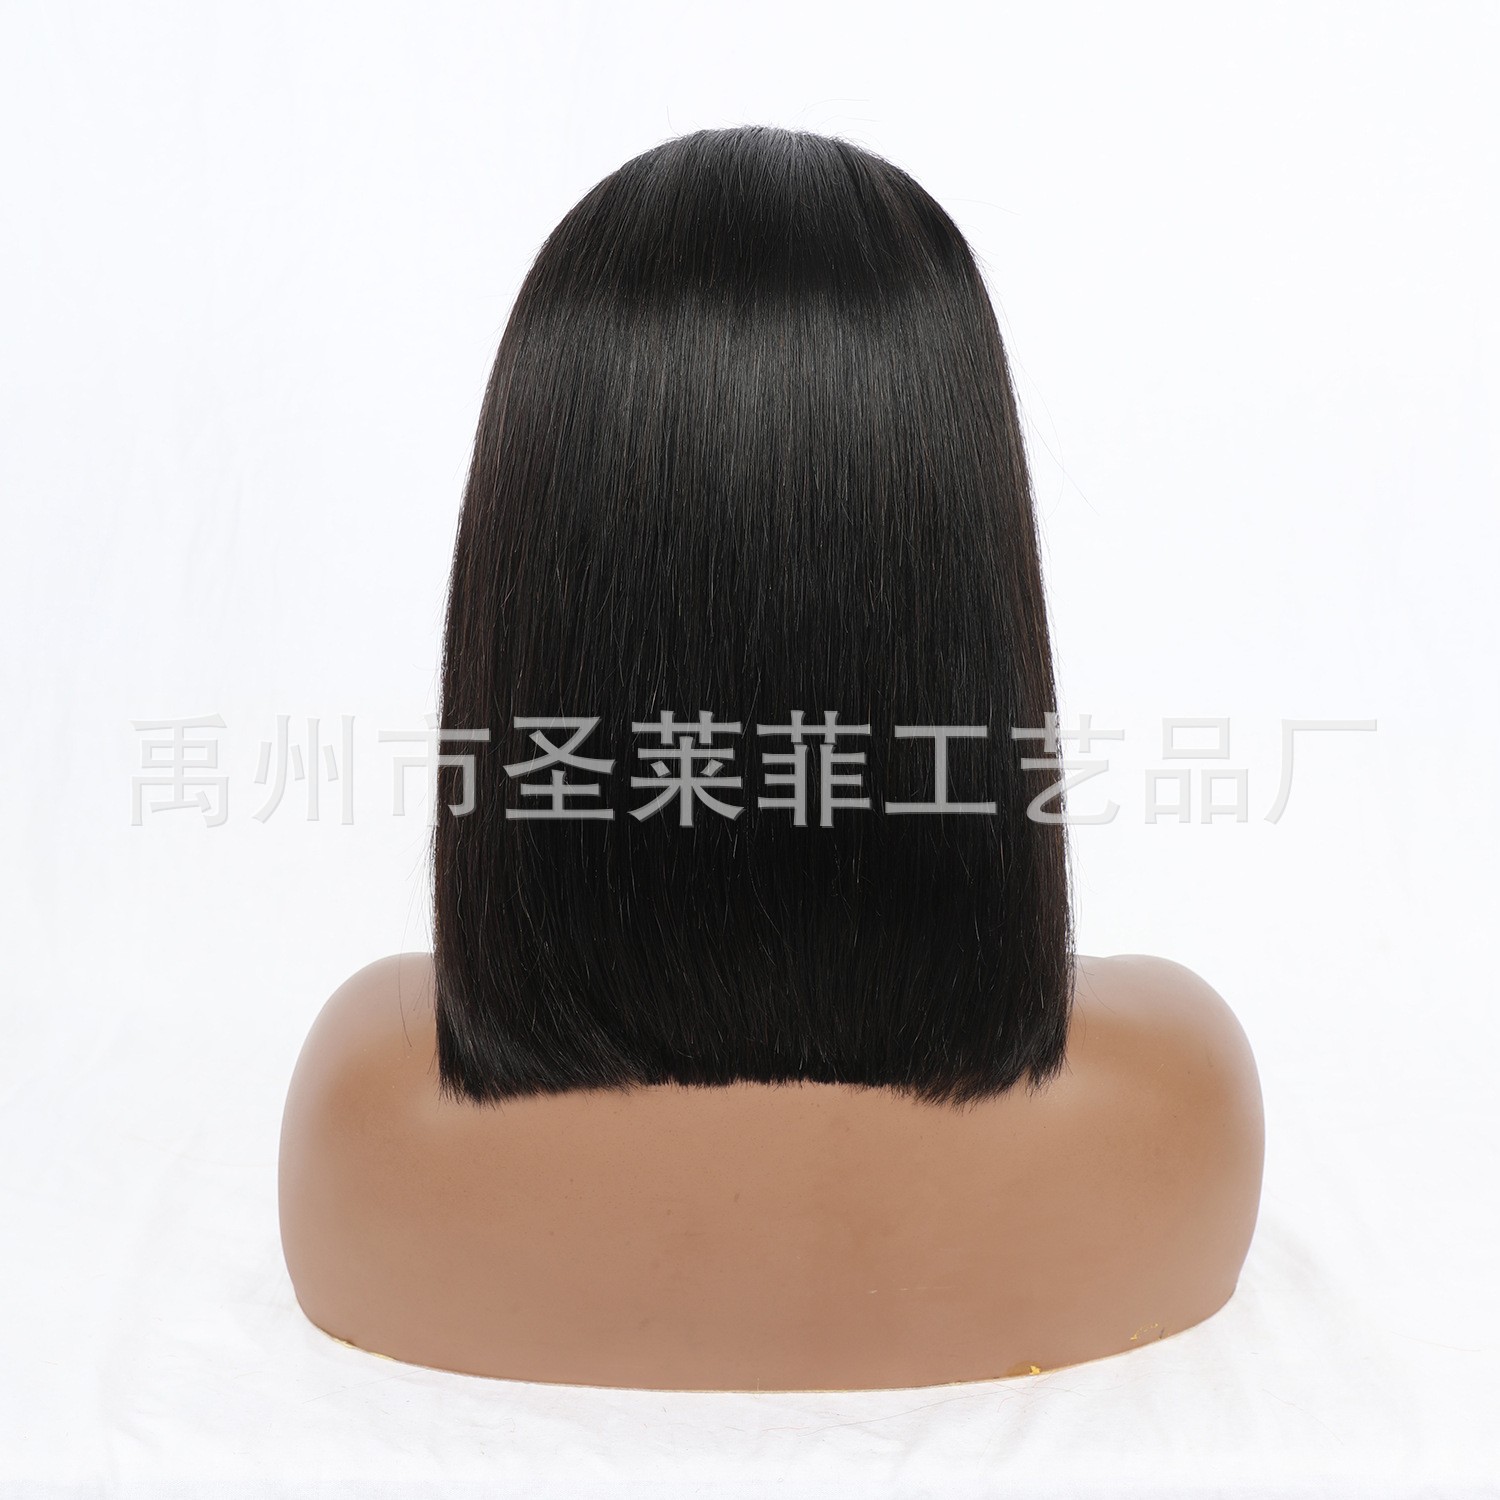 Wholesale of European and American real hair wigs 13 * 4 front lace wig headbands straight human hair wigs